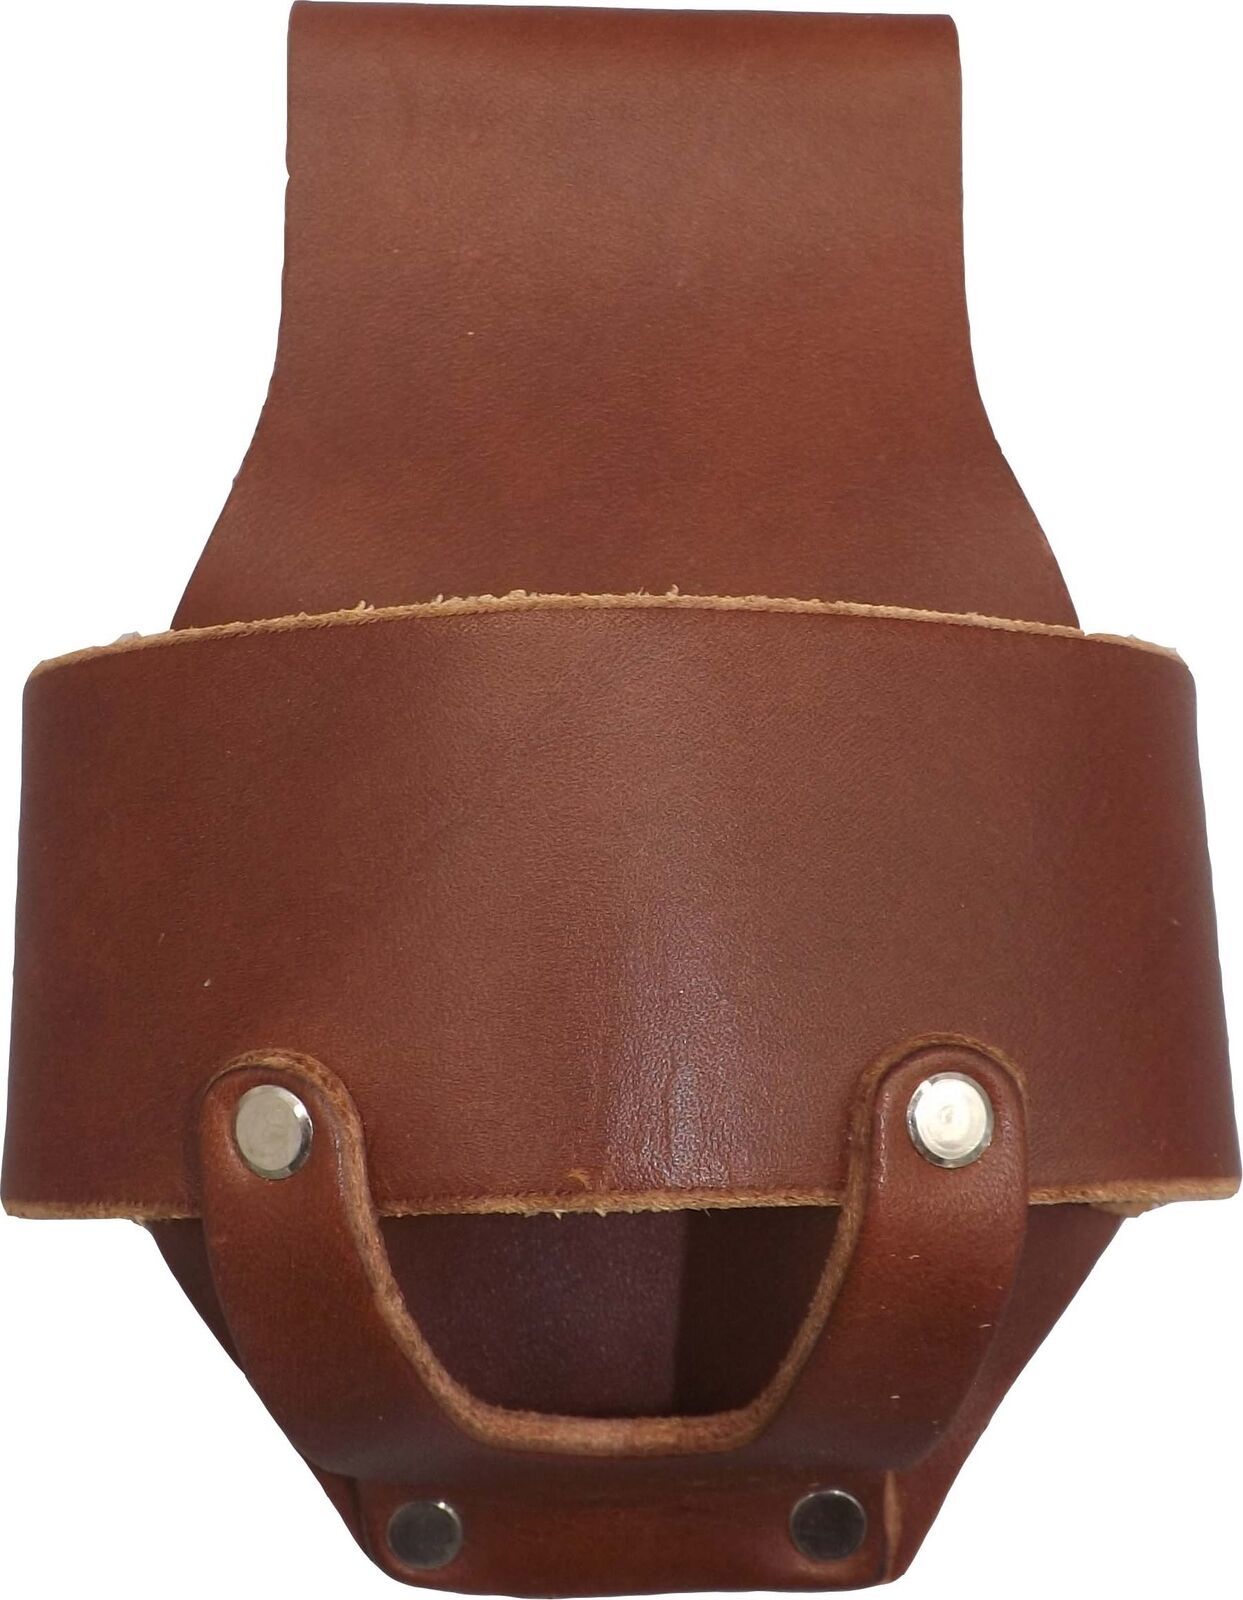 TAPE MEASURE HOLSTER - Amish Handmade Riveted Leather Rule Holder USA - $29.97